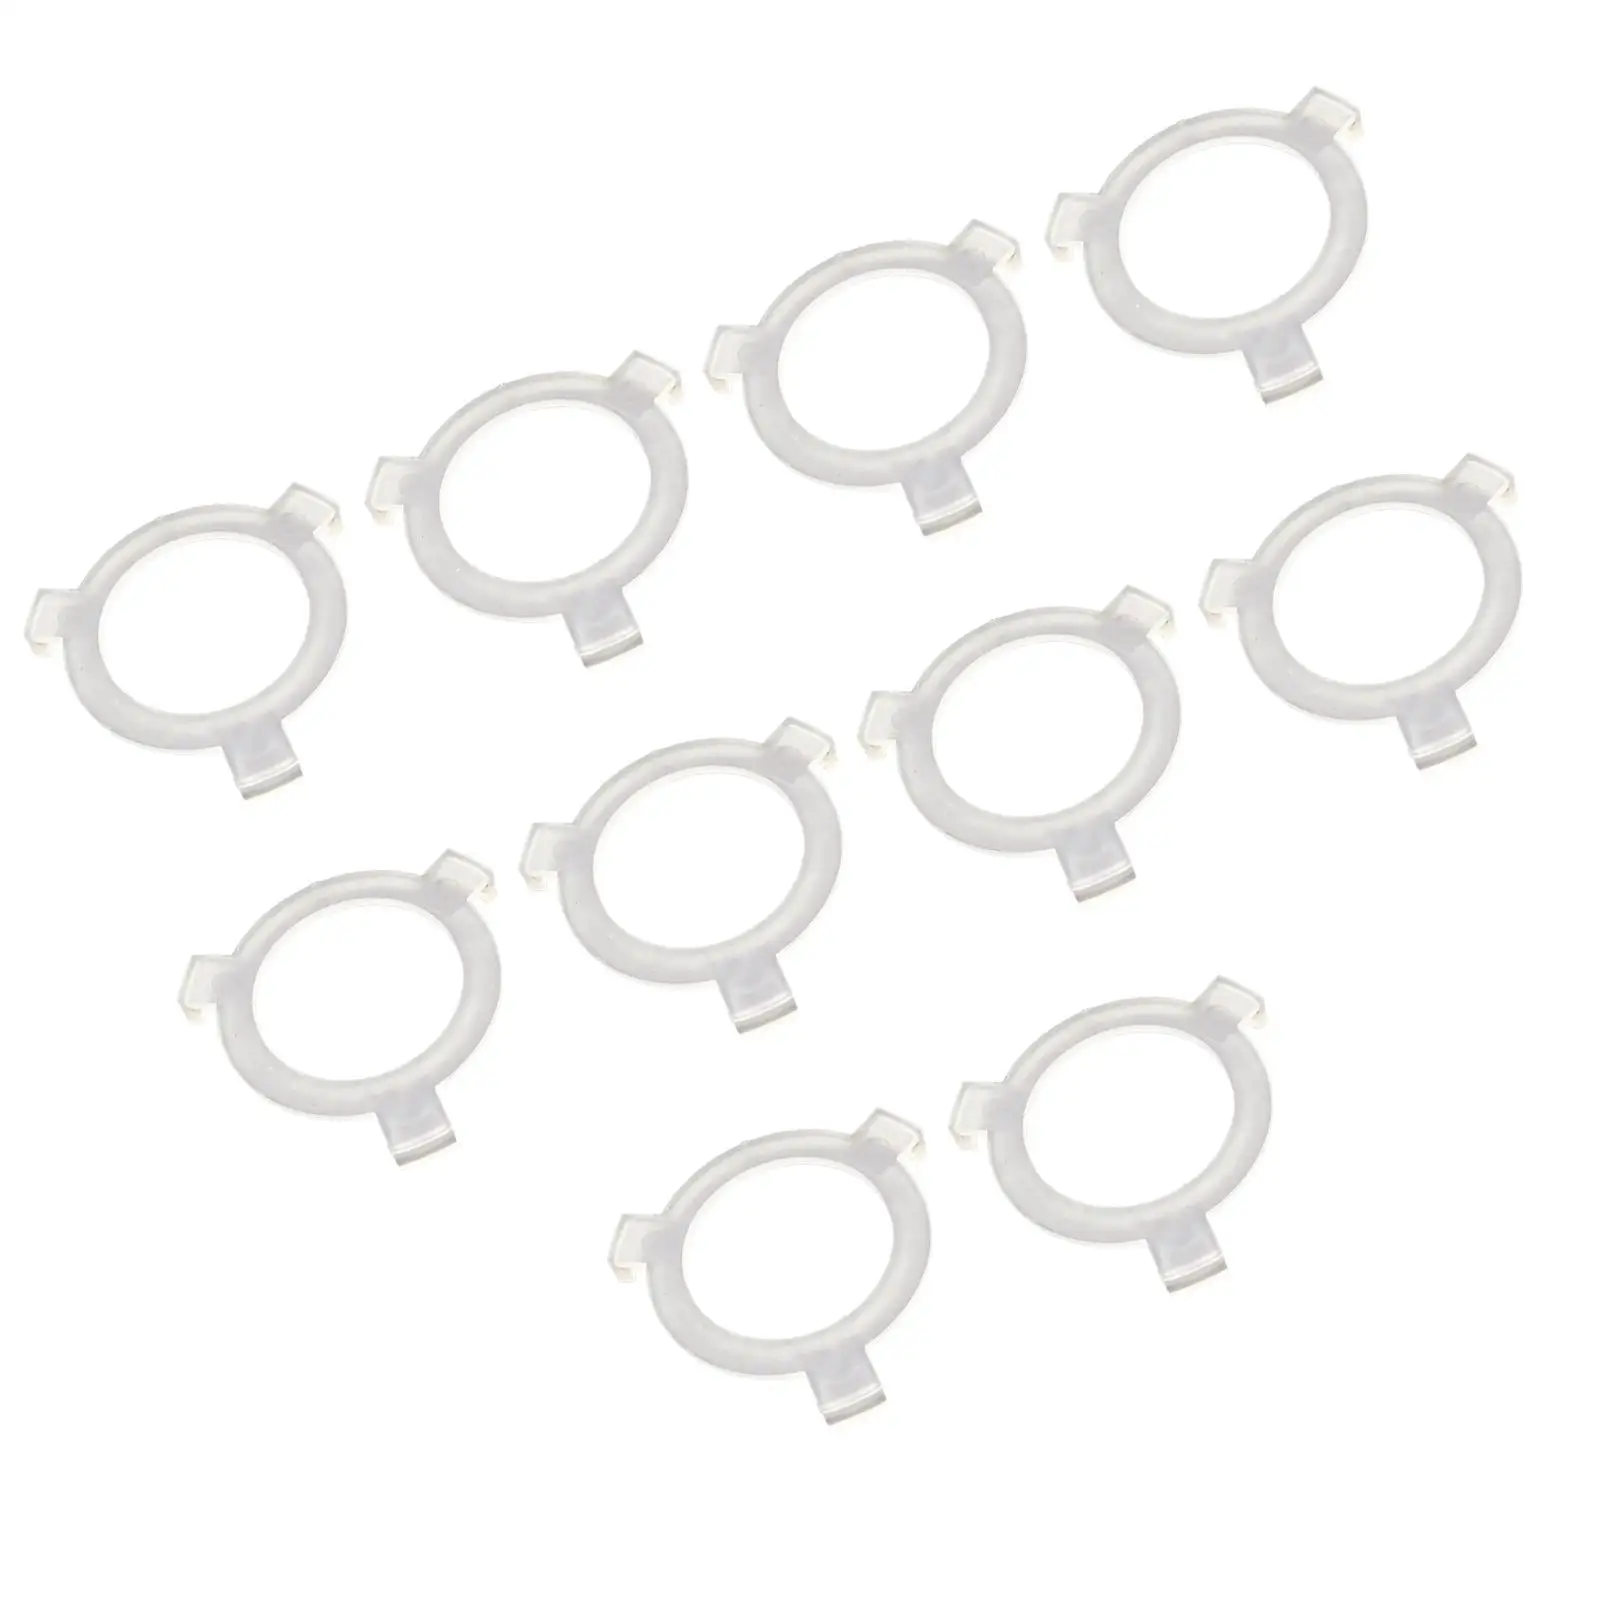 10Pcs Universal E27 to E26 Light Holder Converter, Lampshade Adapter Washer, Lamp Head Base Accessories